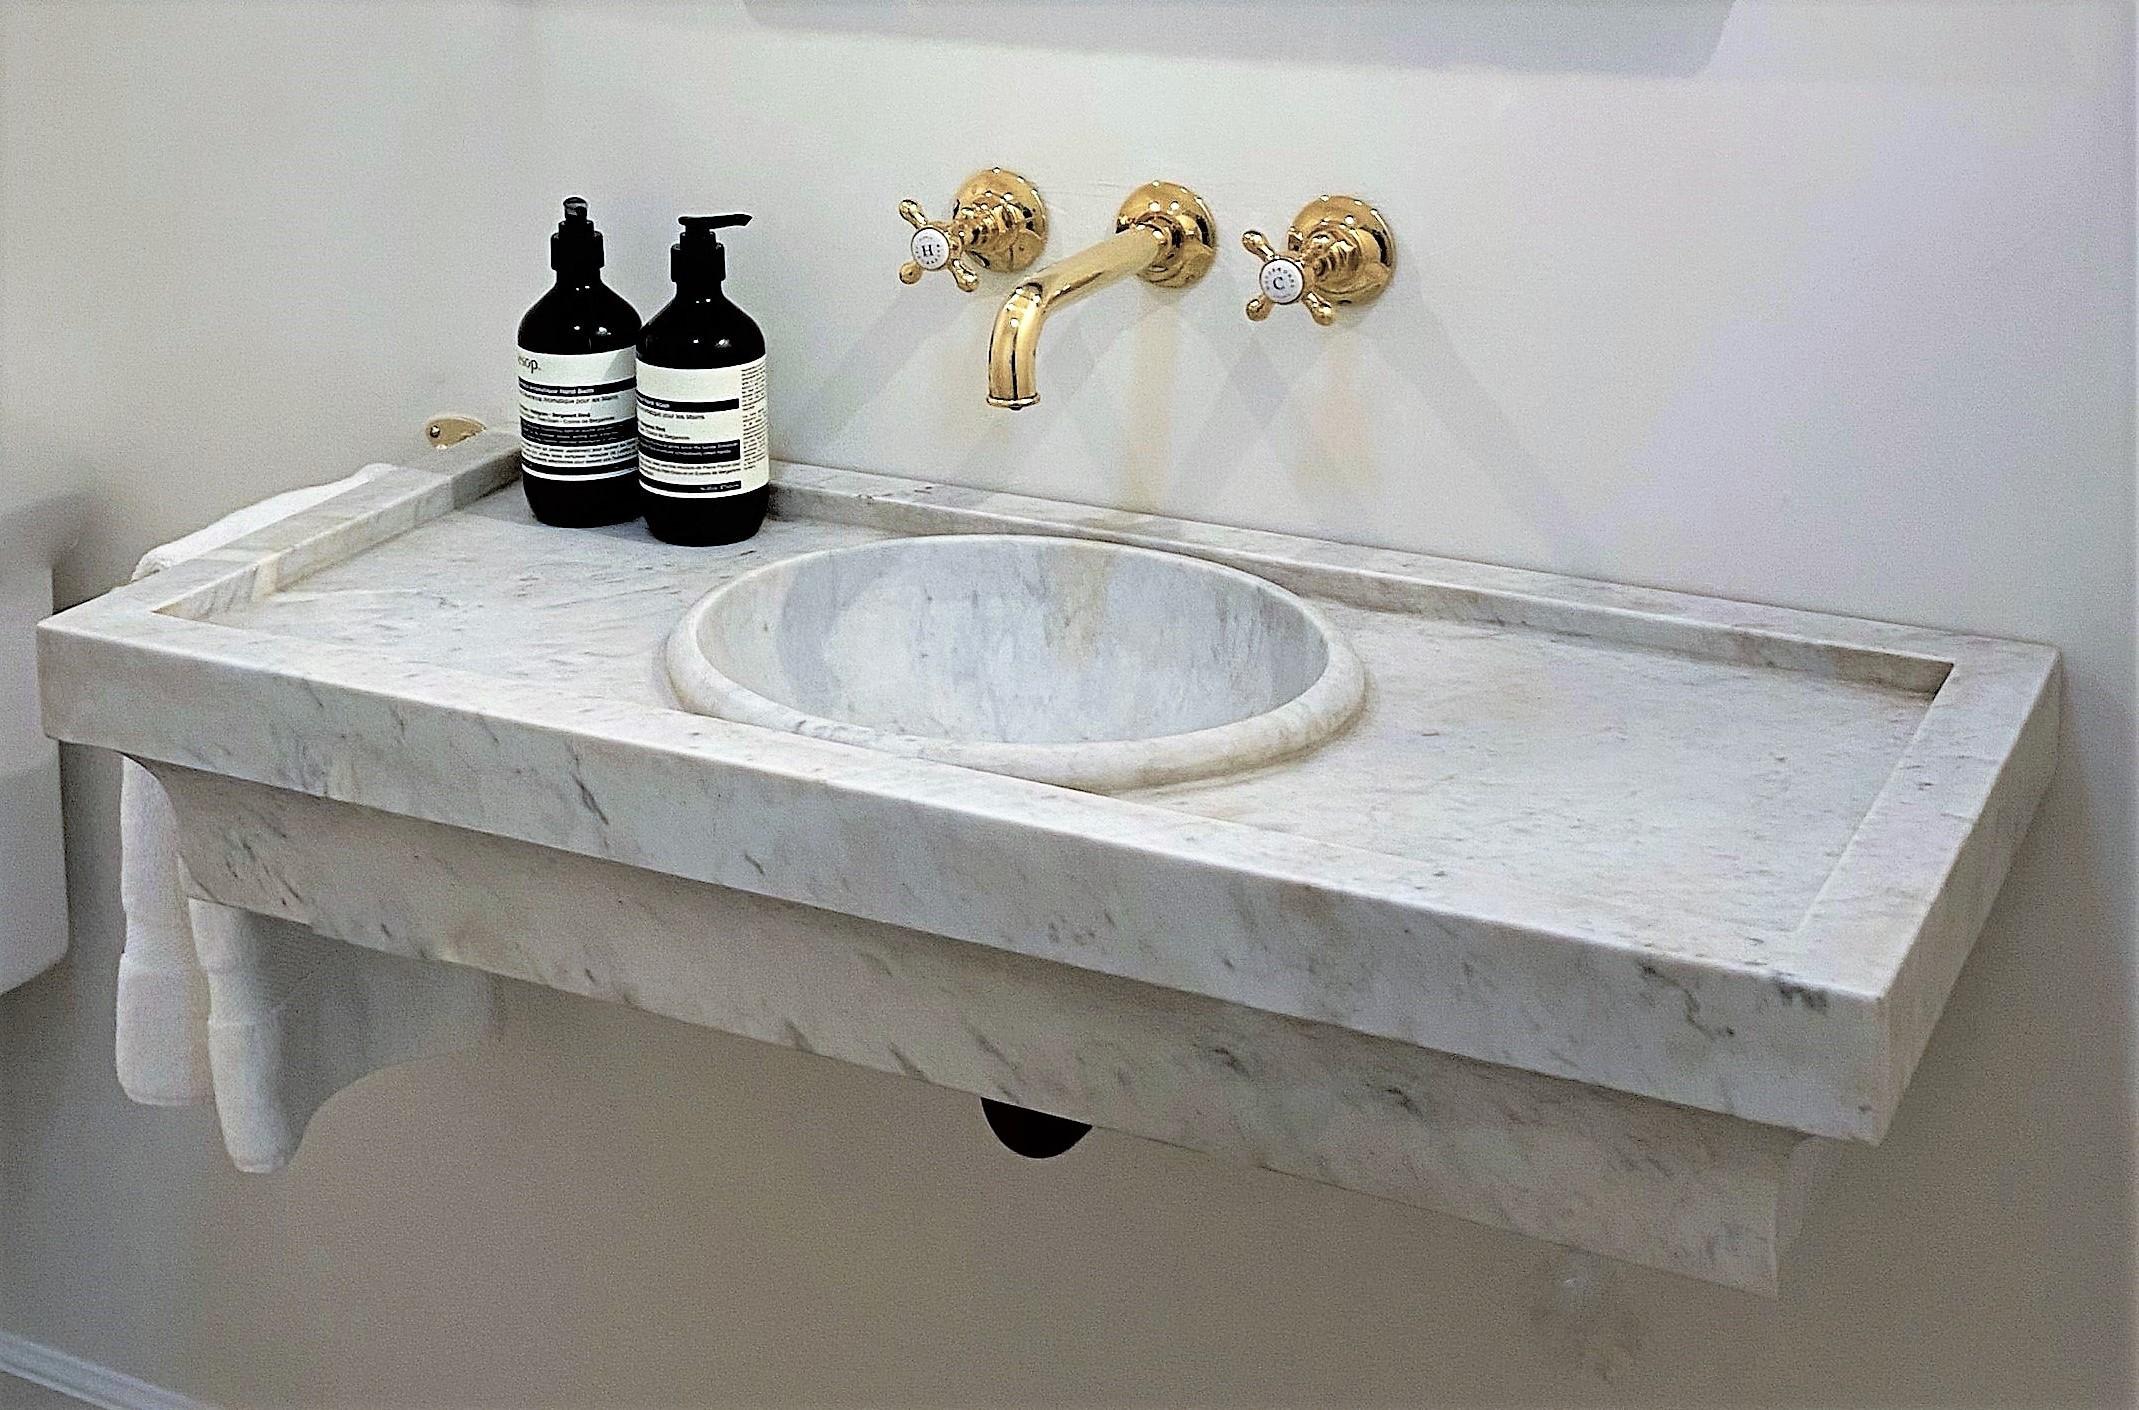 This timeless beautiful Italian classical sink is cut from one single block of white marble, these designs have not changed since Greek and Roman times, it carries superb artistic merit easily fitting in with old and new buildings.
Custom